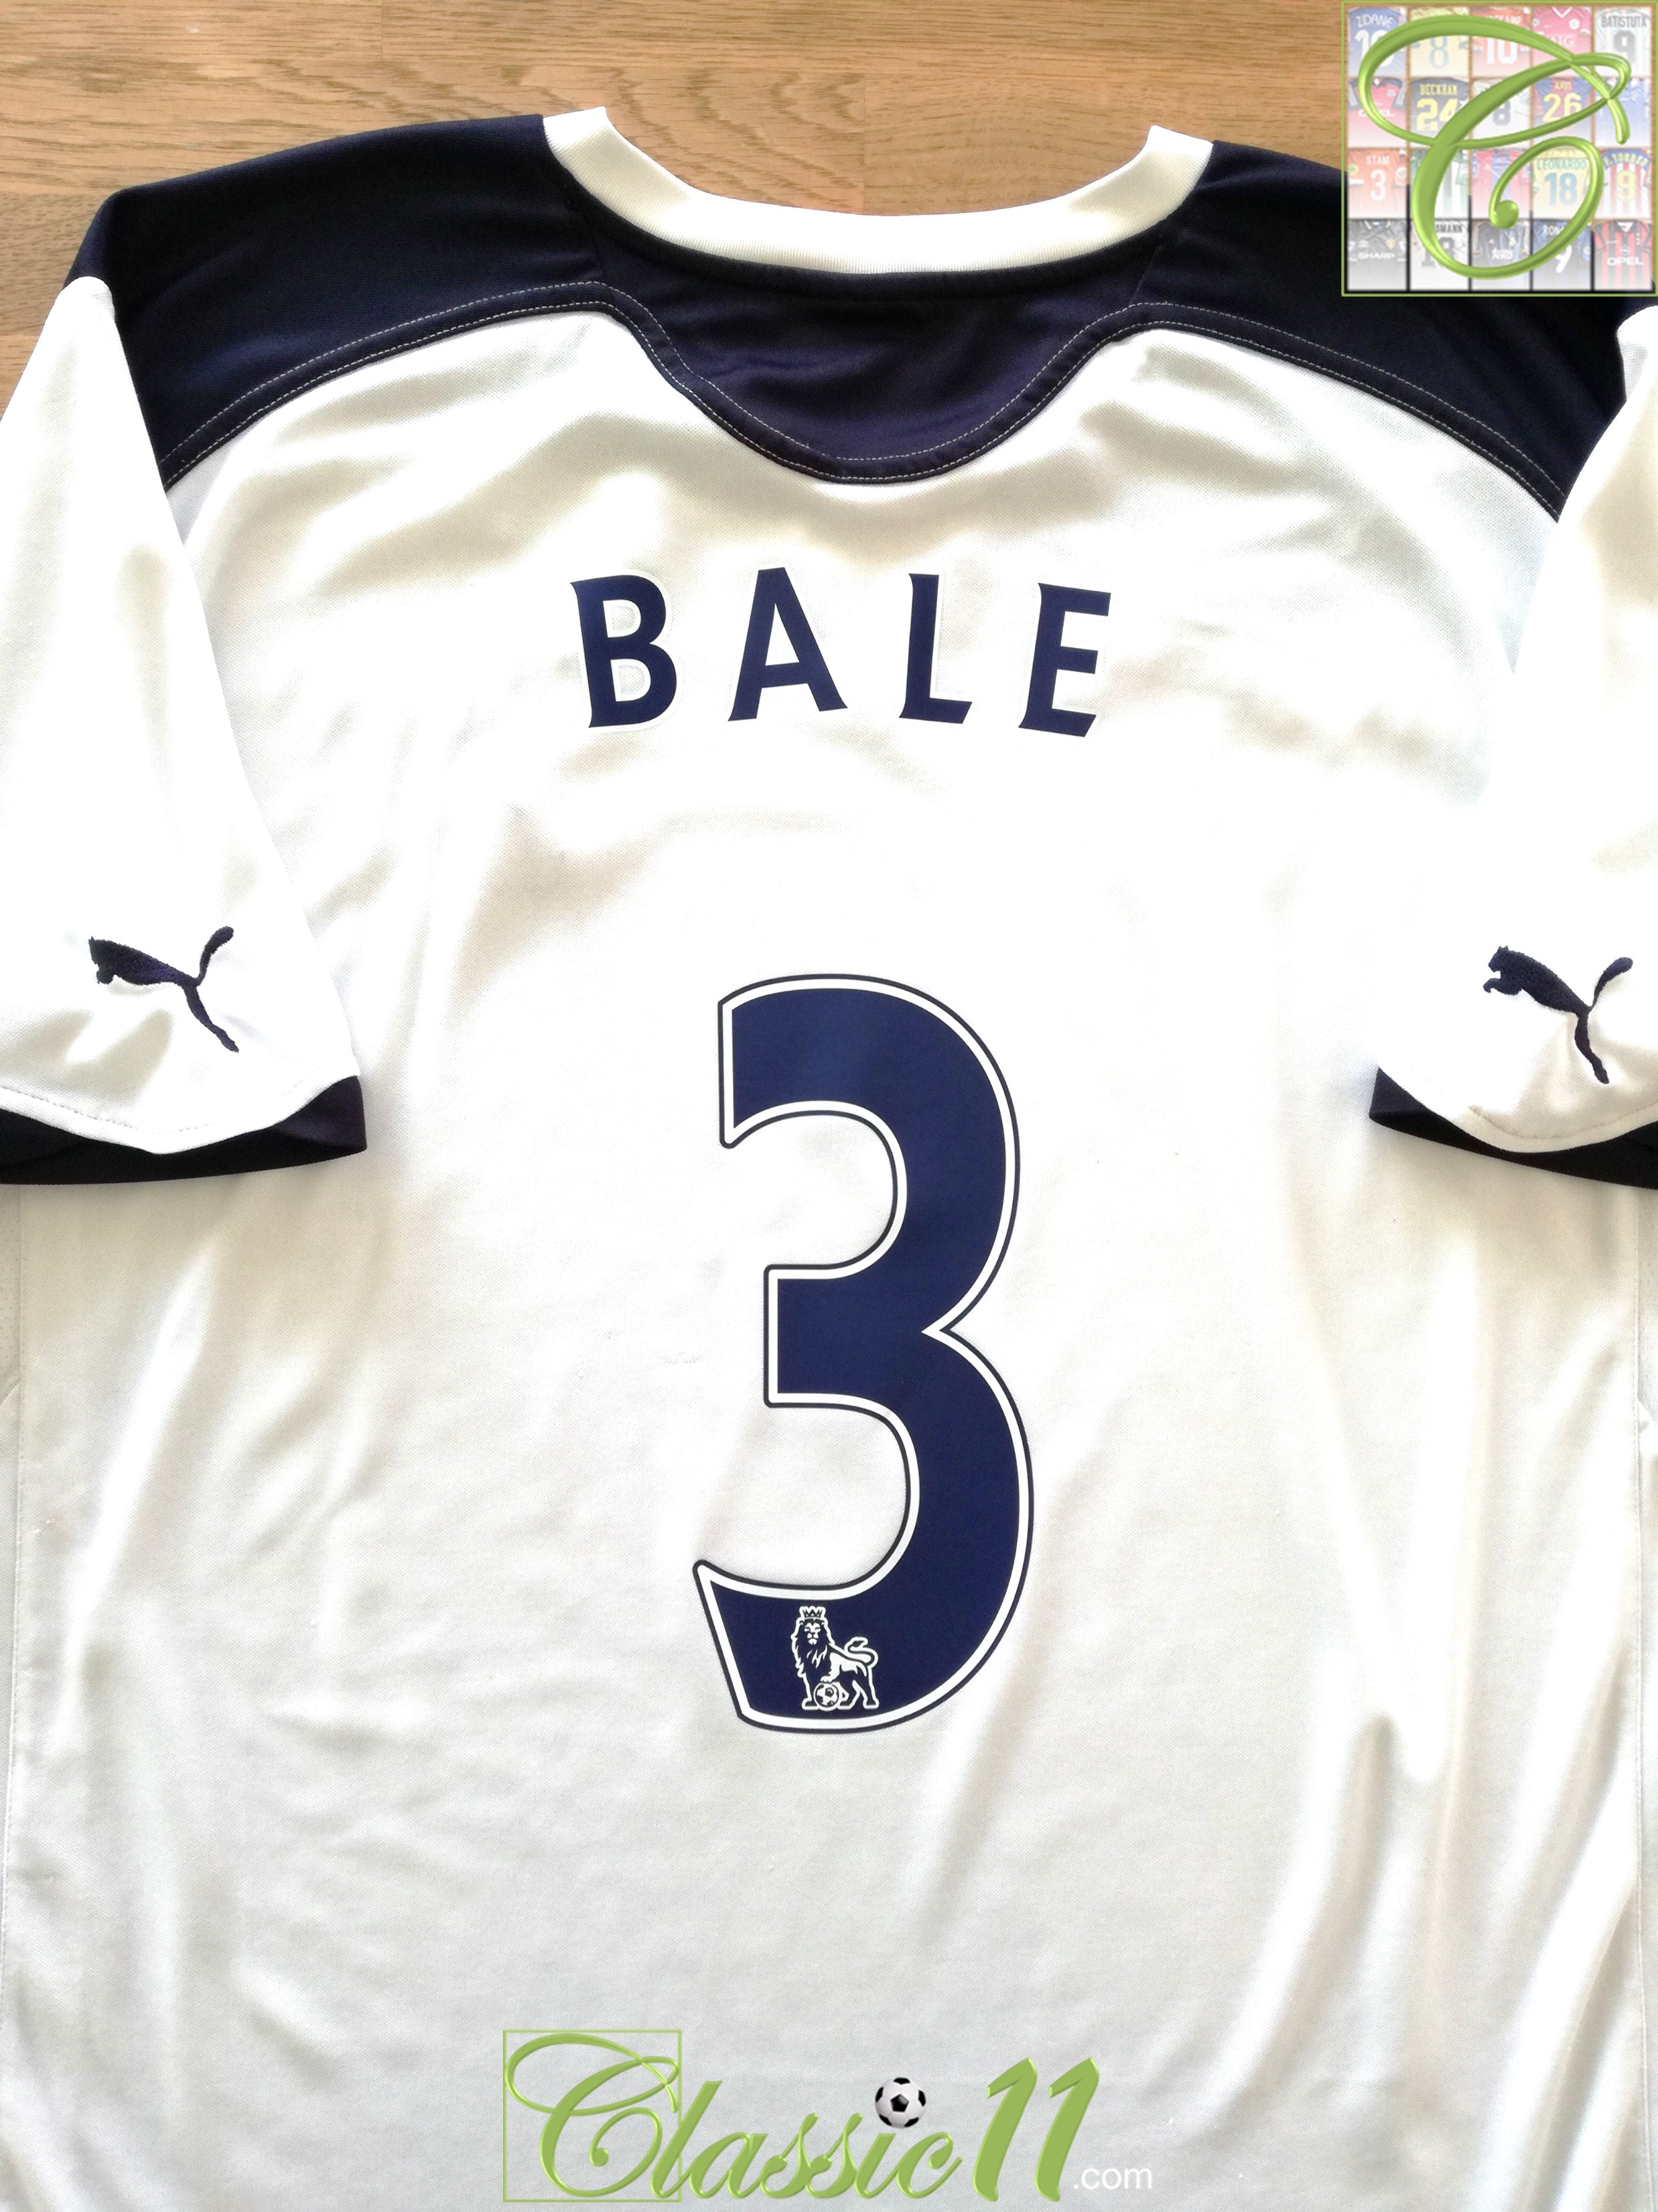 He was born to play for #spurs - Bale home shirt #3 size S #spurs